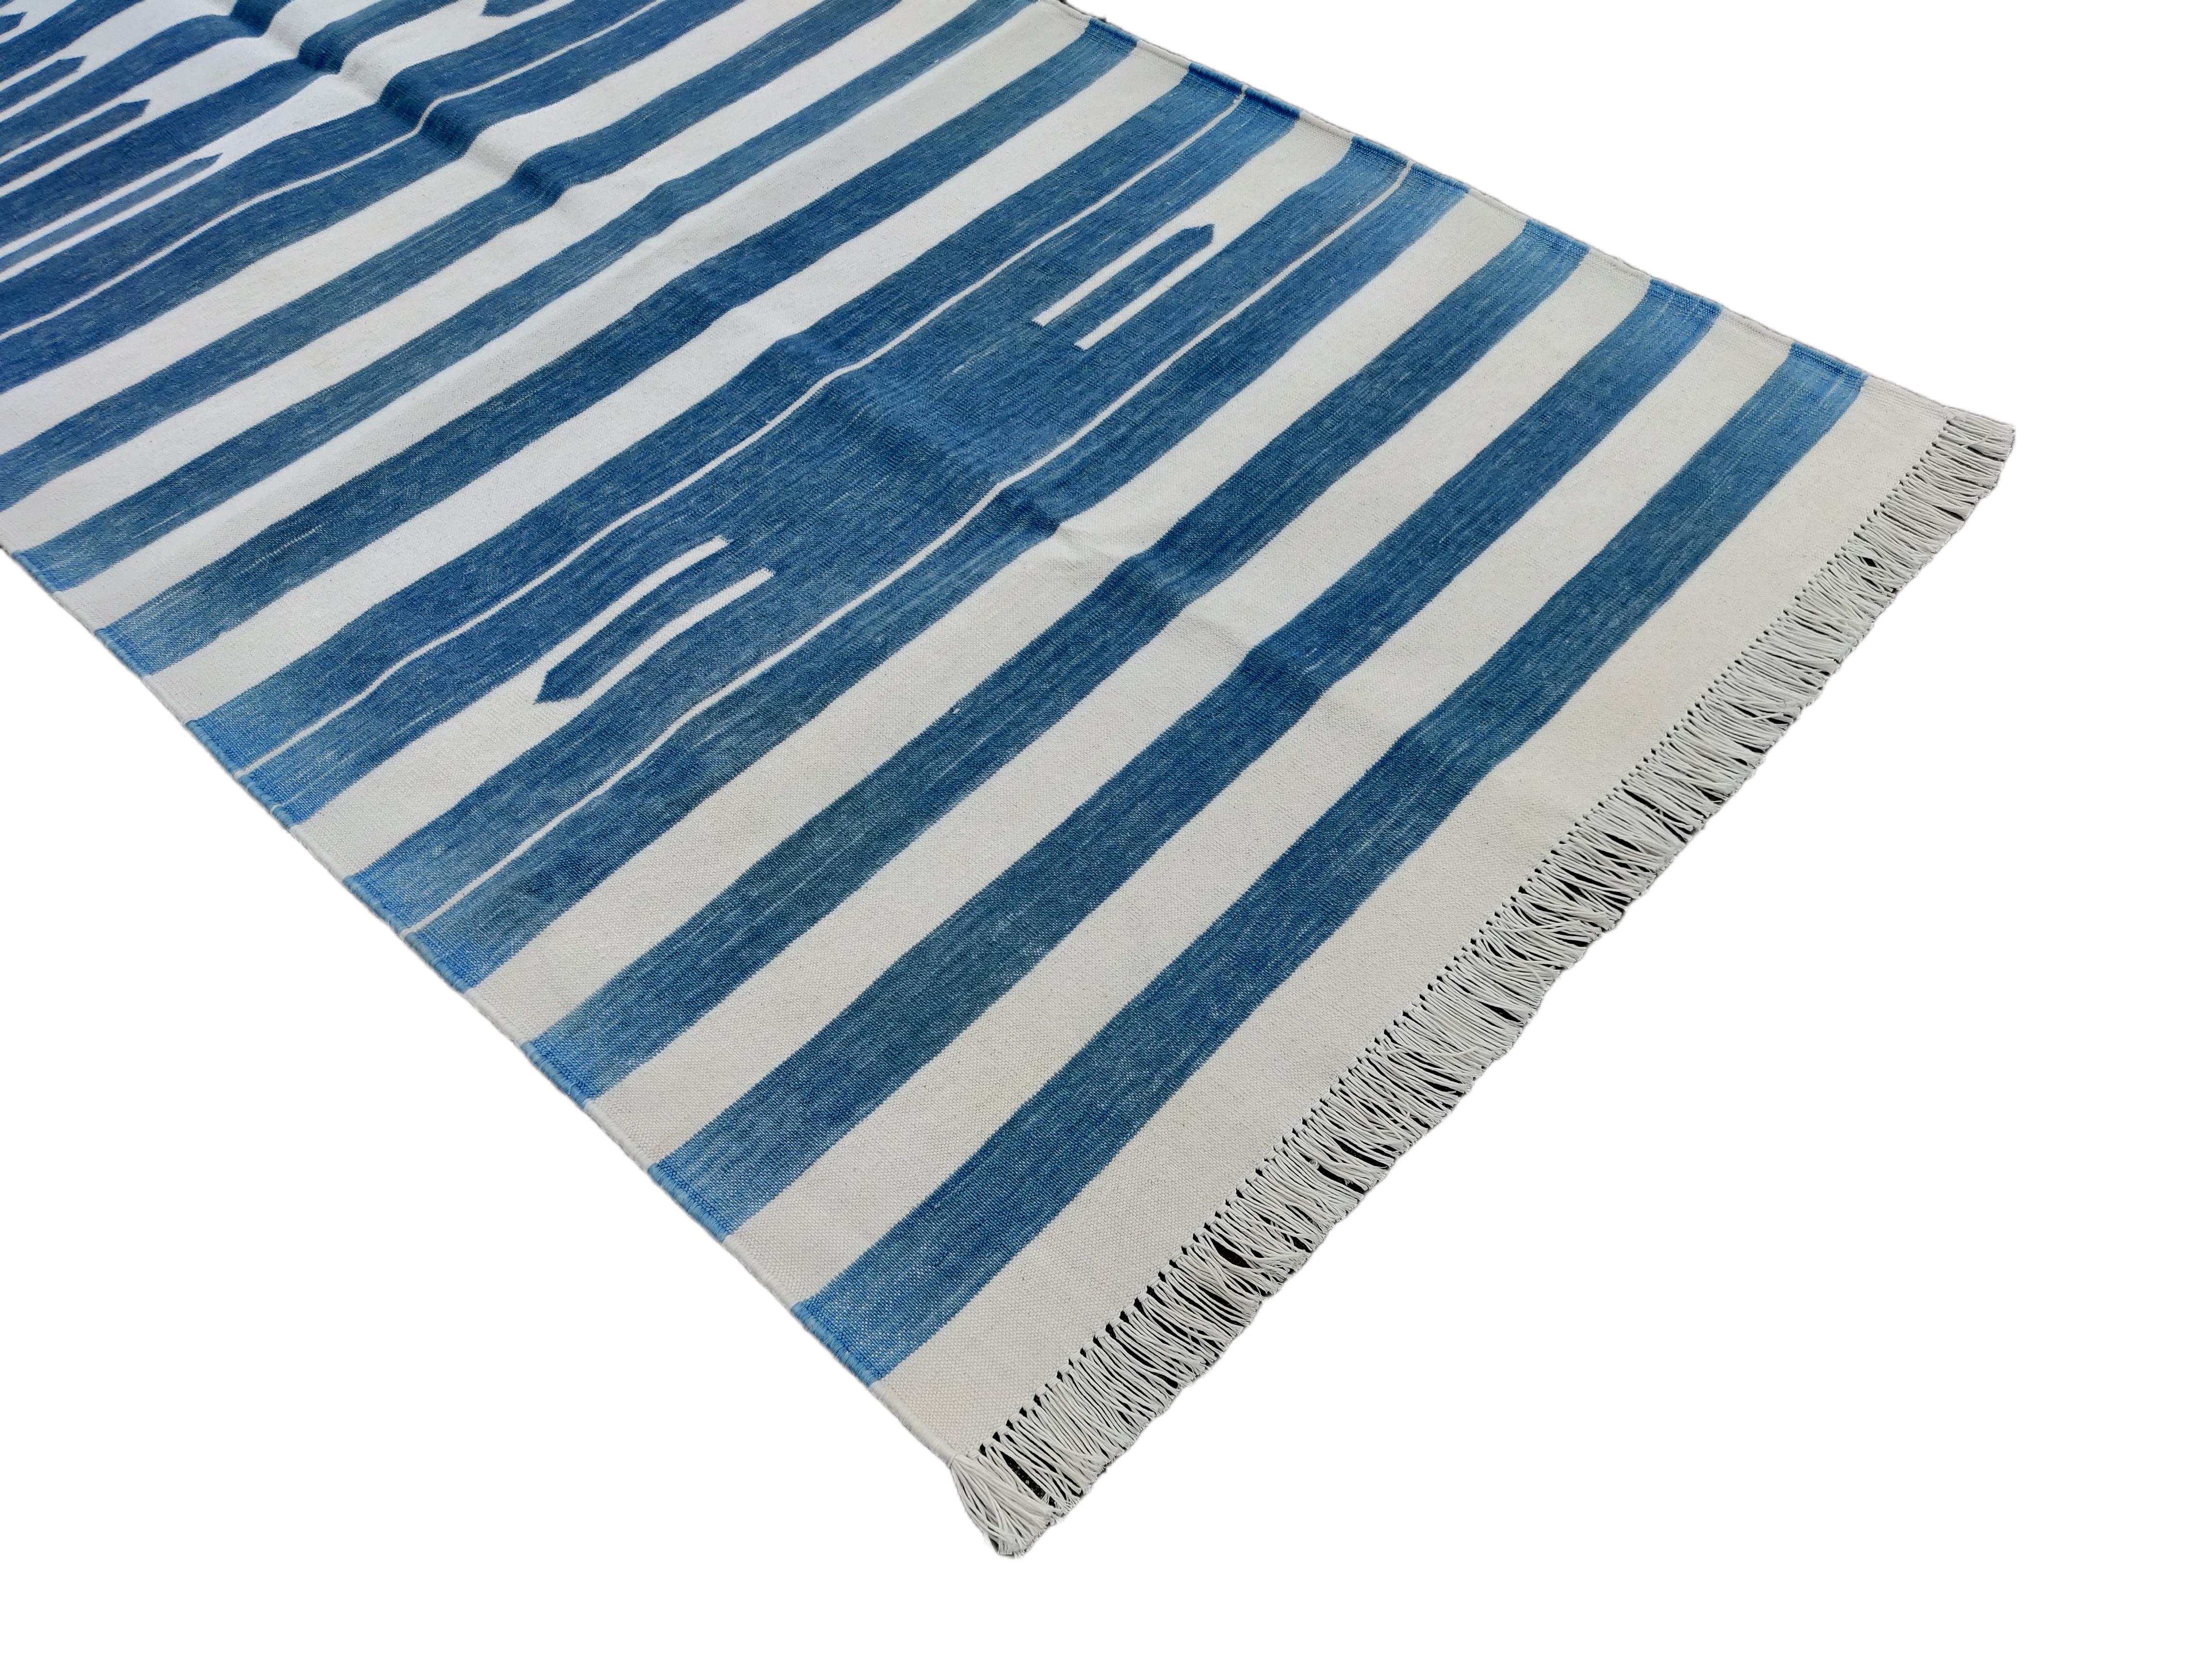 Handmade Cotton Area Flat Weave Runner, 3x10 Blue And White Striped Dhurrie Rug In New Condition For Sale In Jaipur, IN